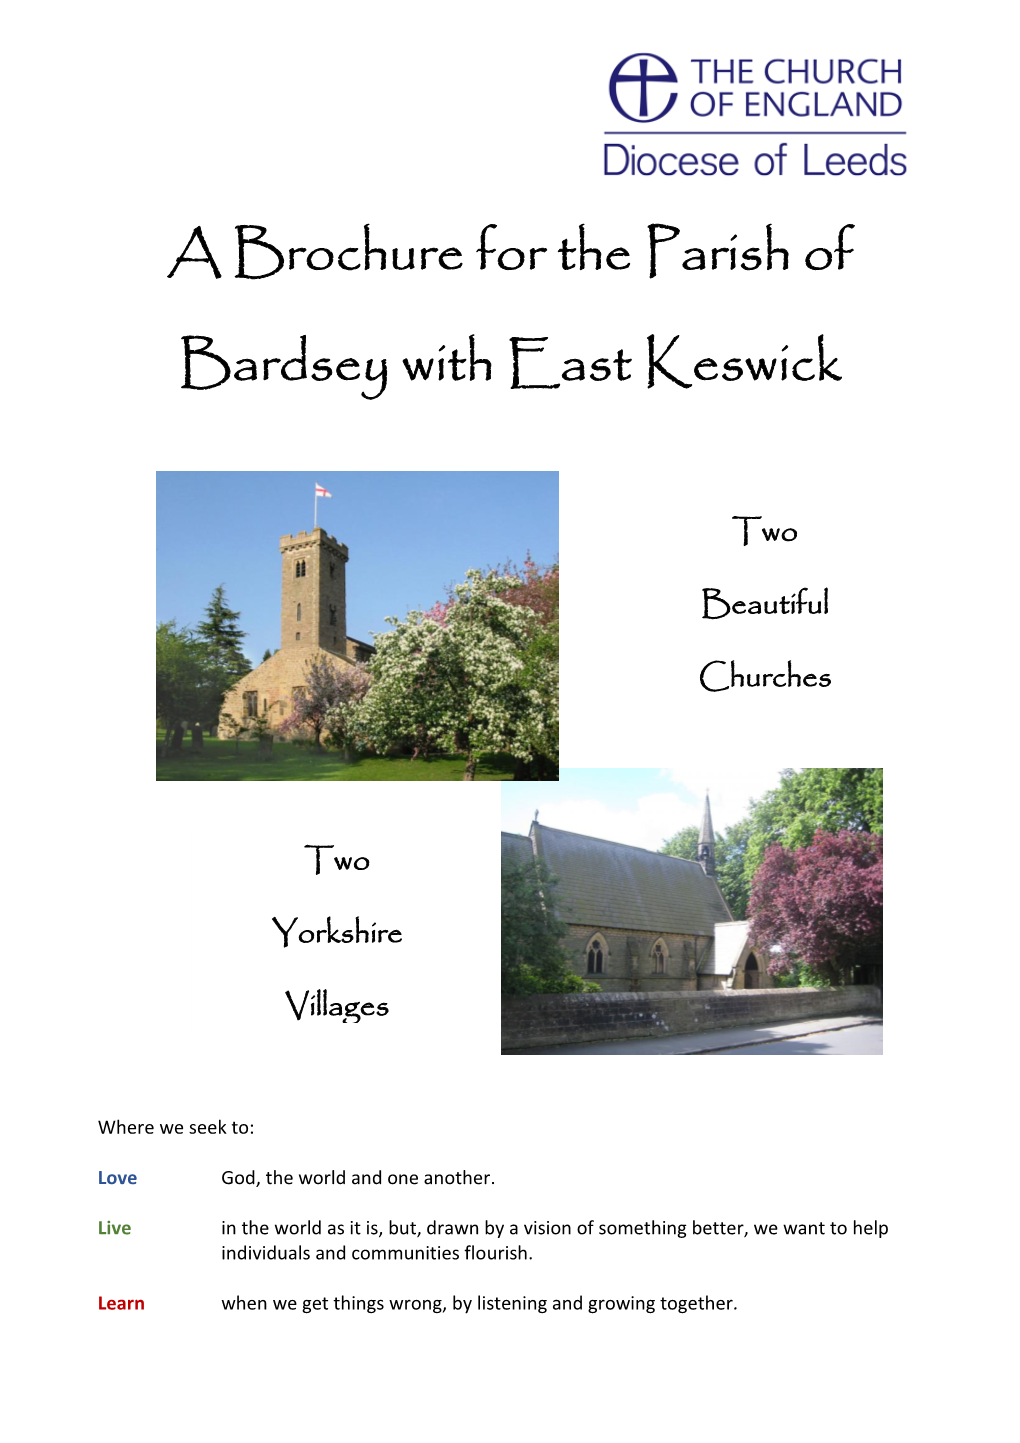 A Brochure for the Parish of Bardsey with East Keswick